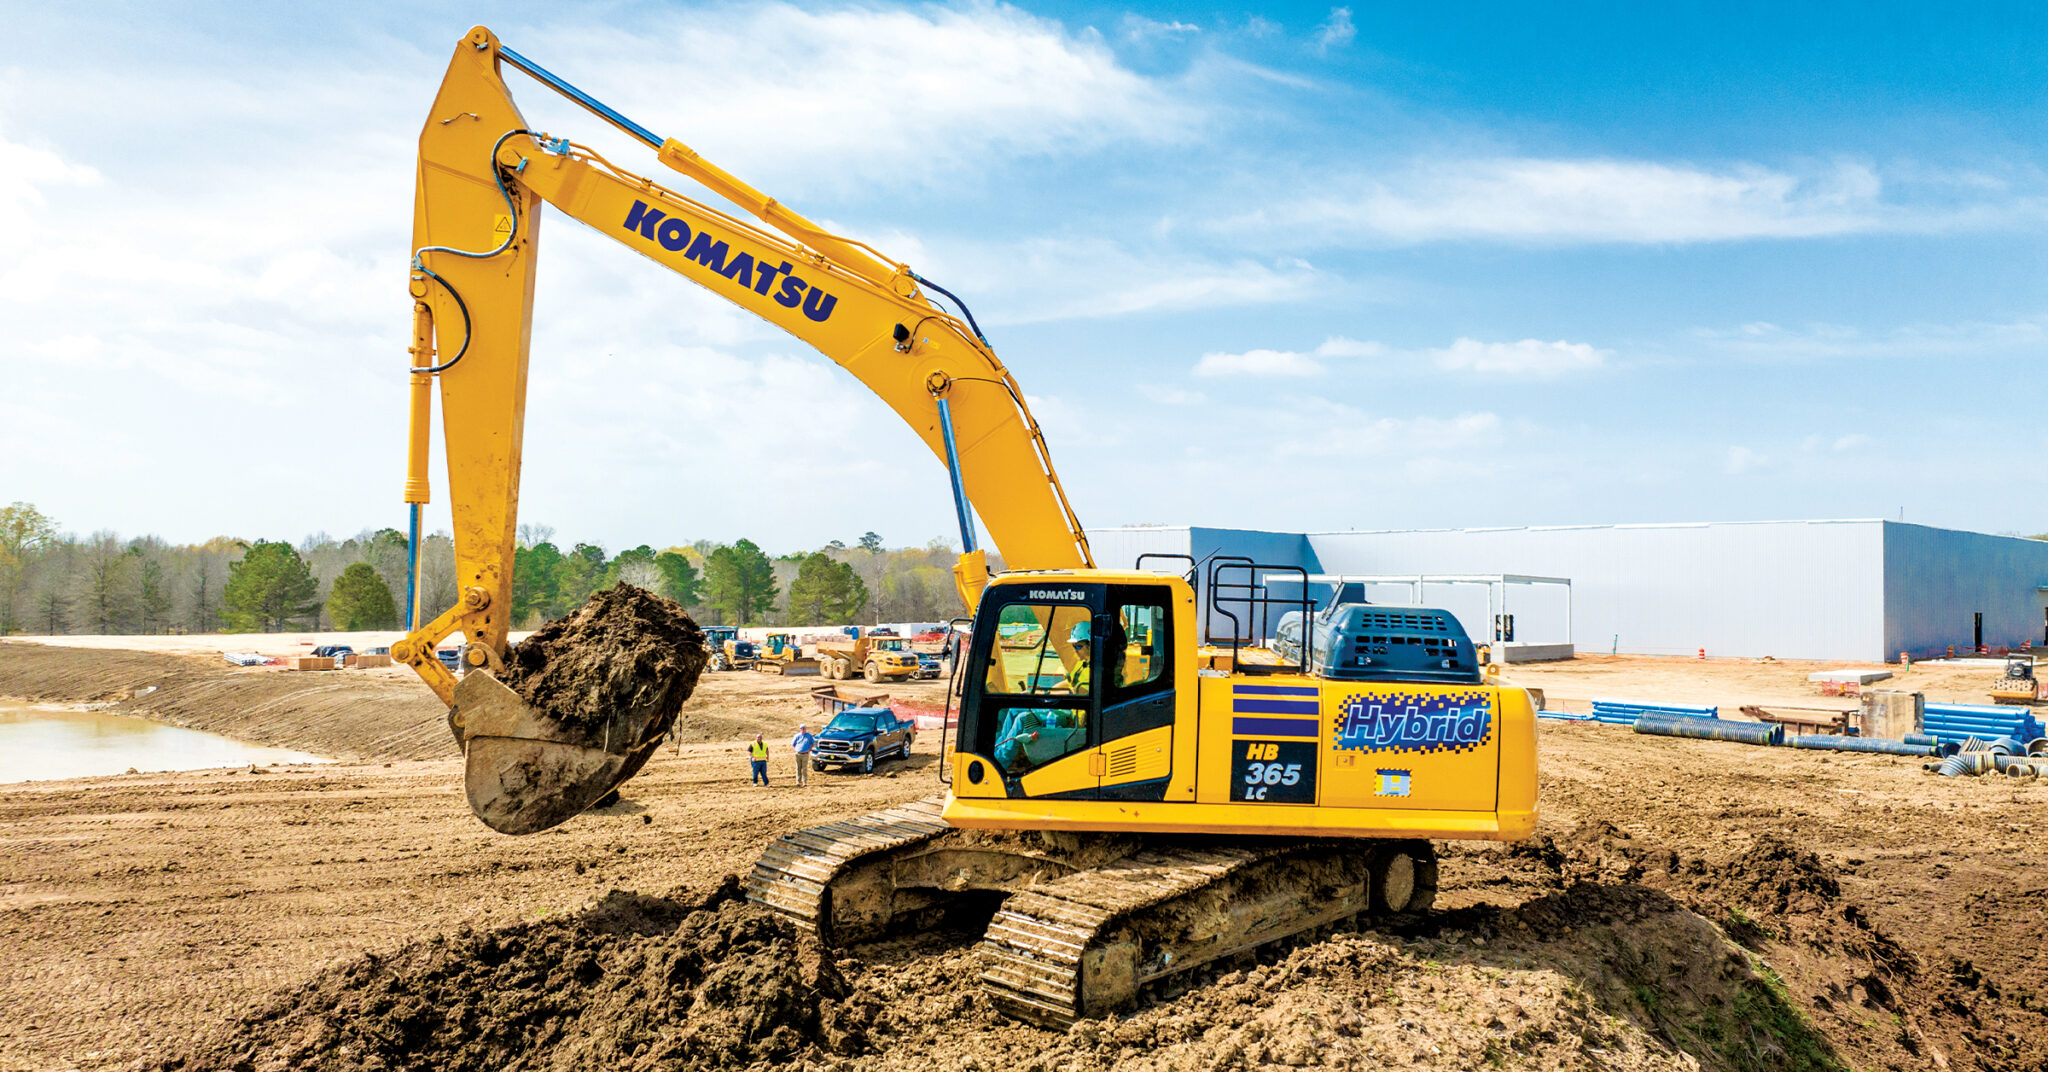 An image of an operator swinging a Komatsu HB365LC-3 excavator to load a haul truck